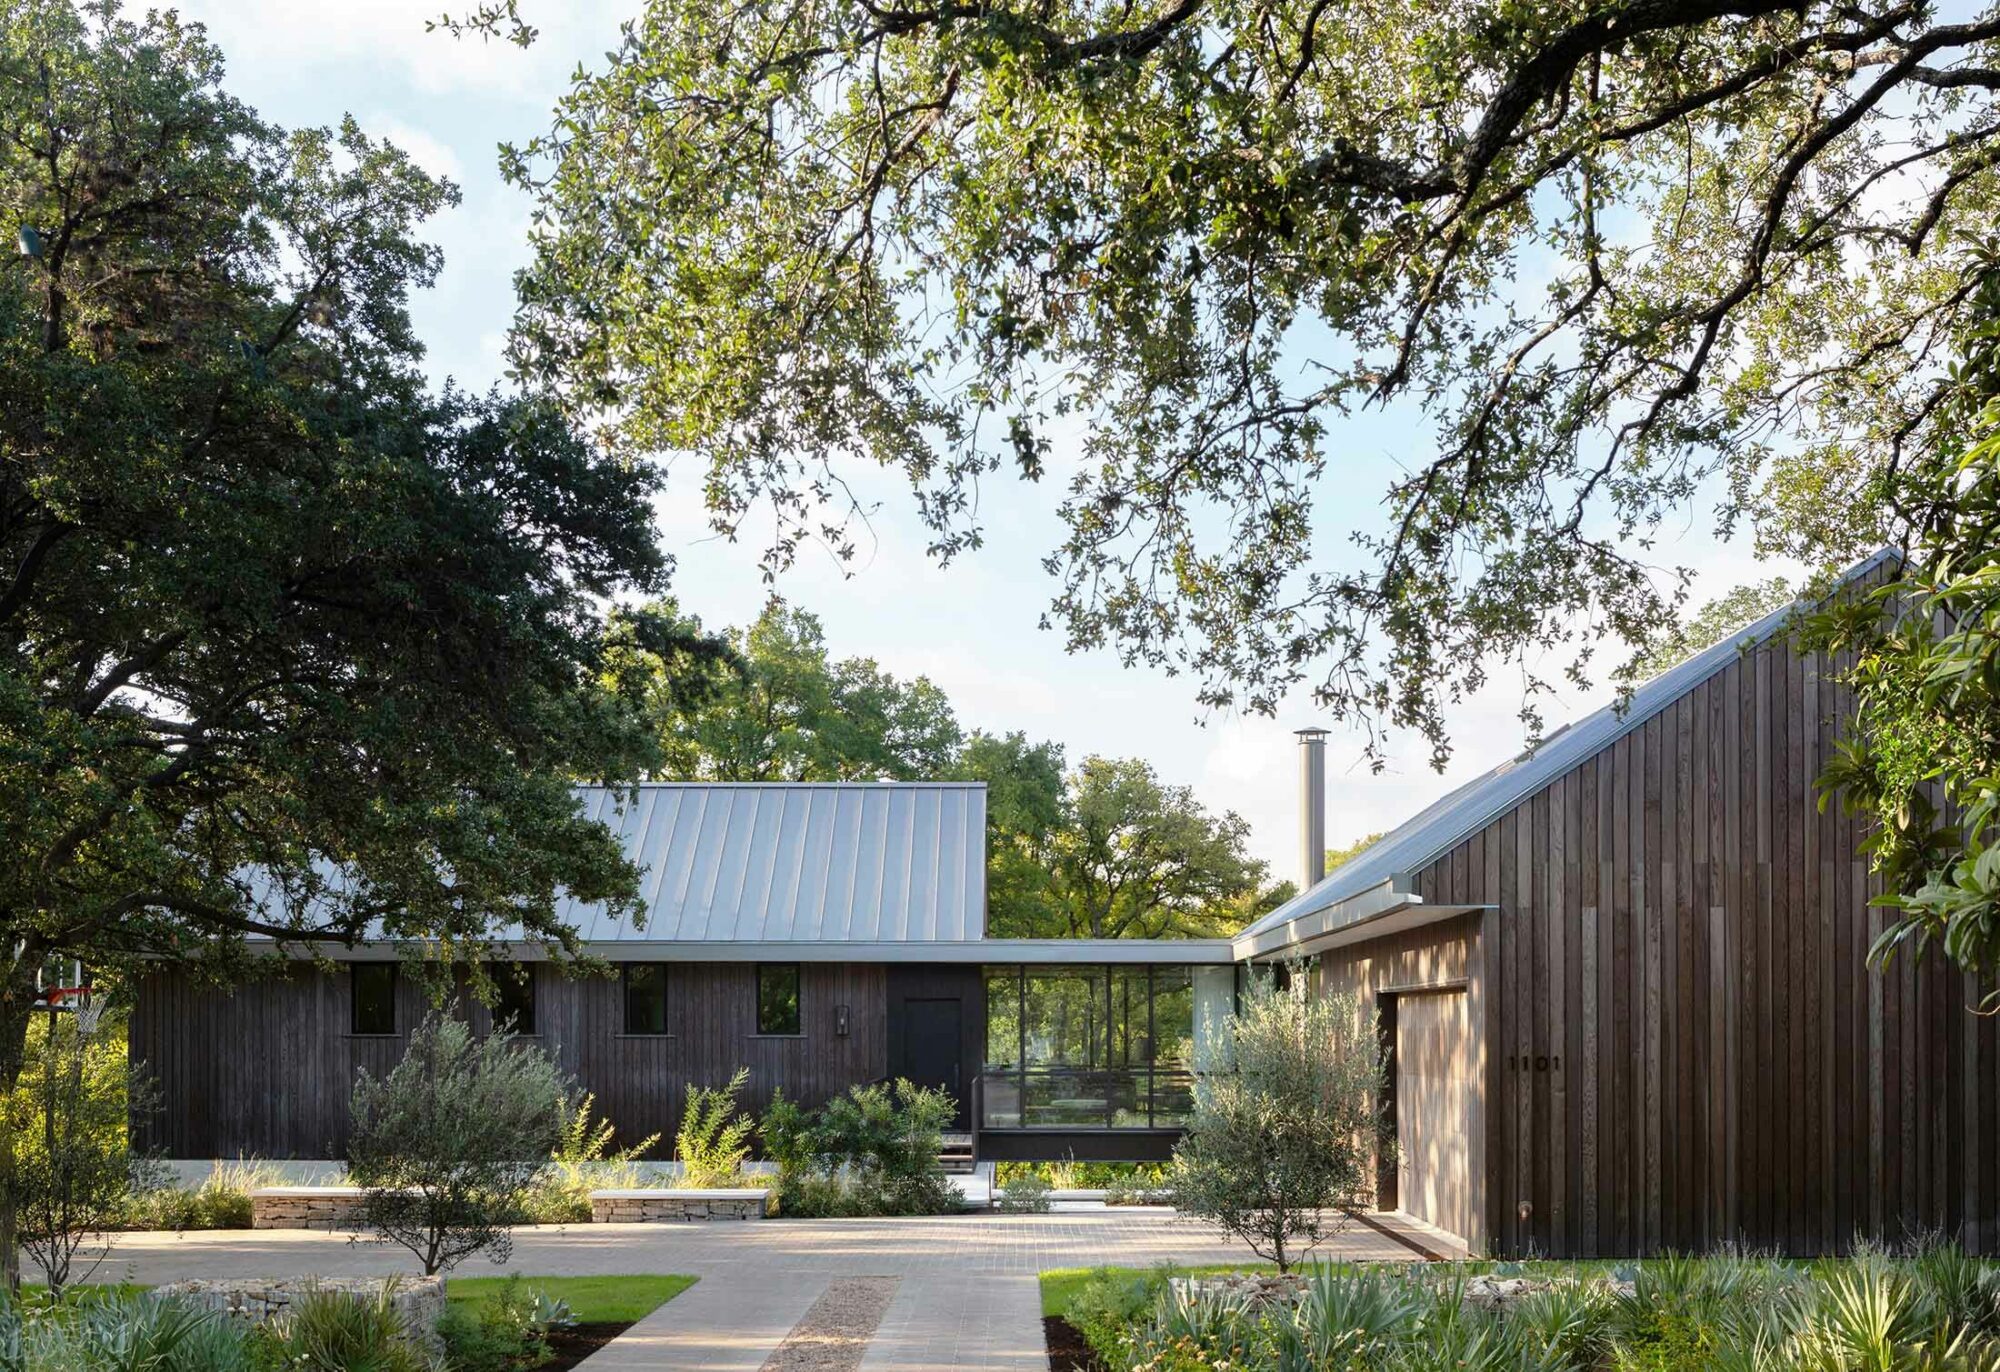 exterior architectural features, contemporary modern architecture, texas architecture